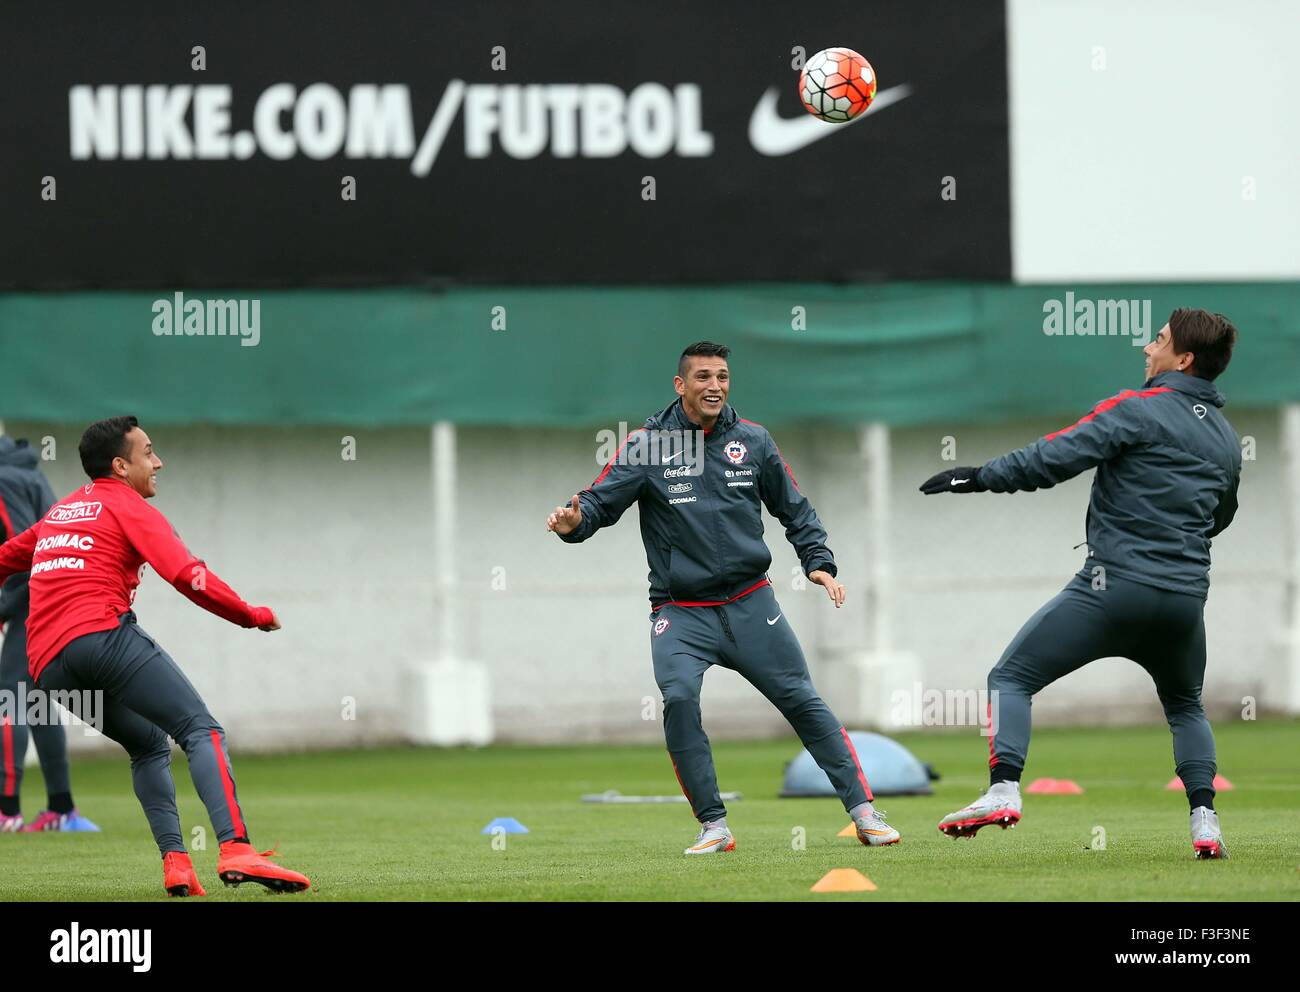 Santiago, Chile. 6th Oct, 2015. Chile national soccer team players Fabian Orellana (L), Mark Gonzalez (C) and Eduardo Vargas (R), take part in a training session at Juan Pinto Duran Sports Complex, in Santiago city, capital of Chile, Oct. 6, 2015. Chile soccer team took part in a training session facing its qualifying match against Brazil heading to World Cup Russia 2018, which will be played on Oct. 8 at the Santiago National Stadium. © ANFP/Xinhua/Alamy Live News Stock Photo